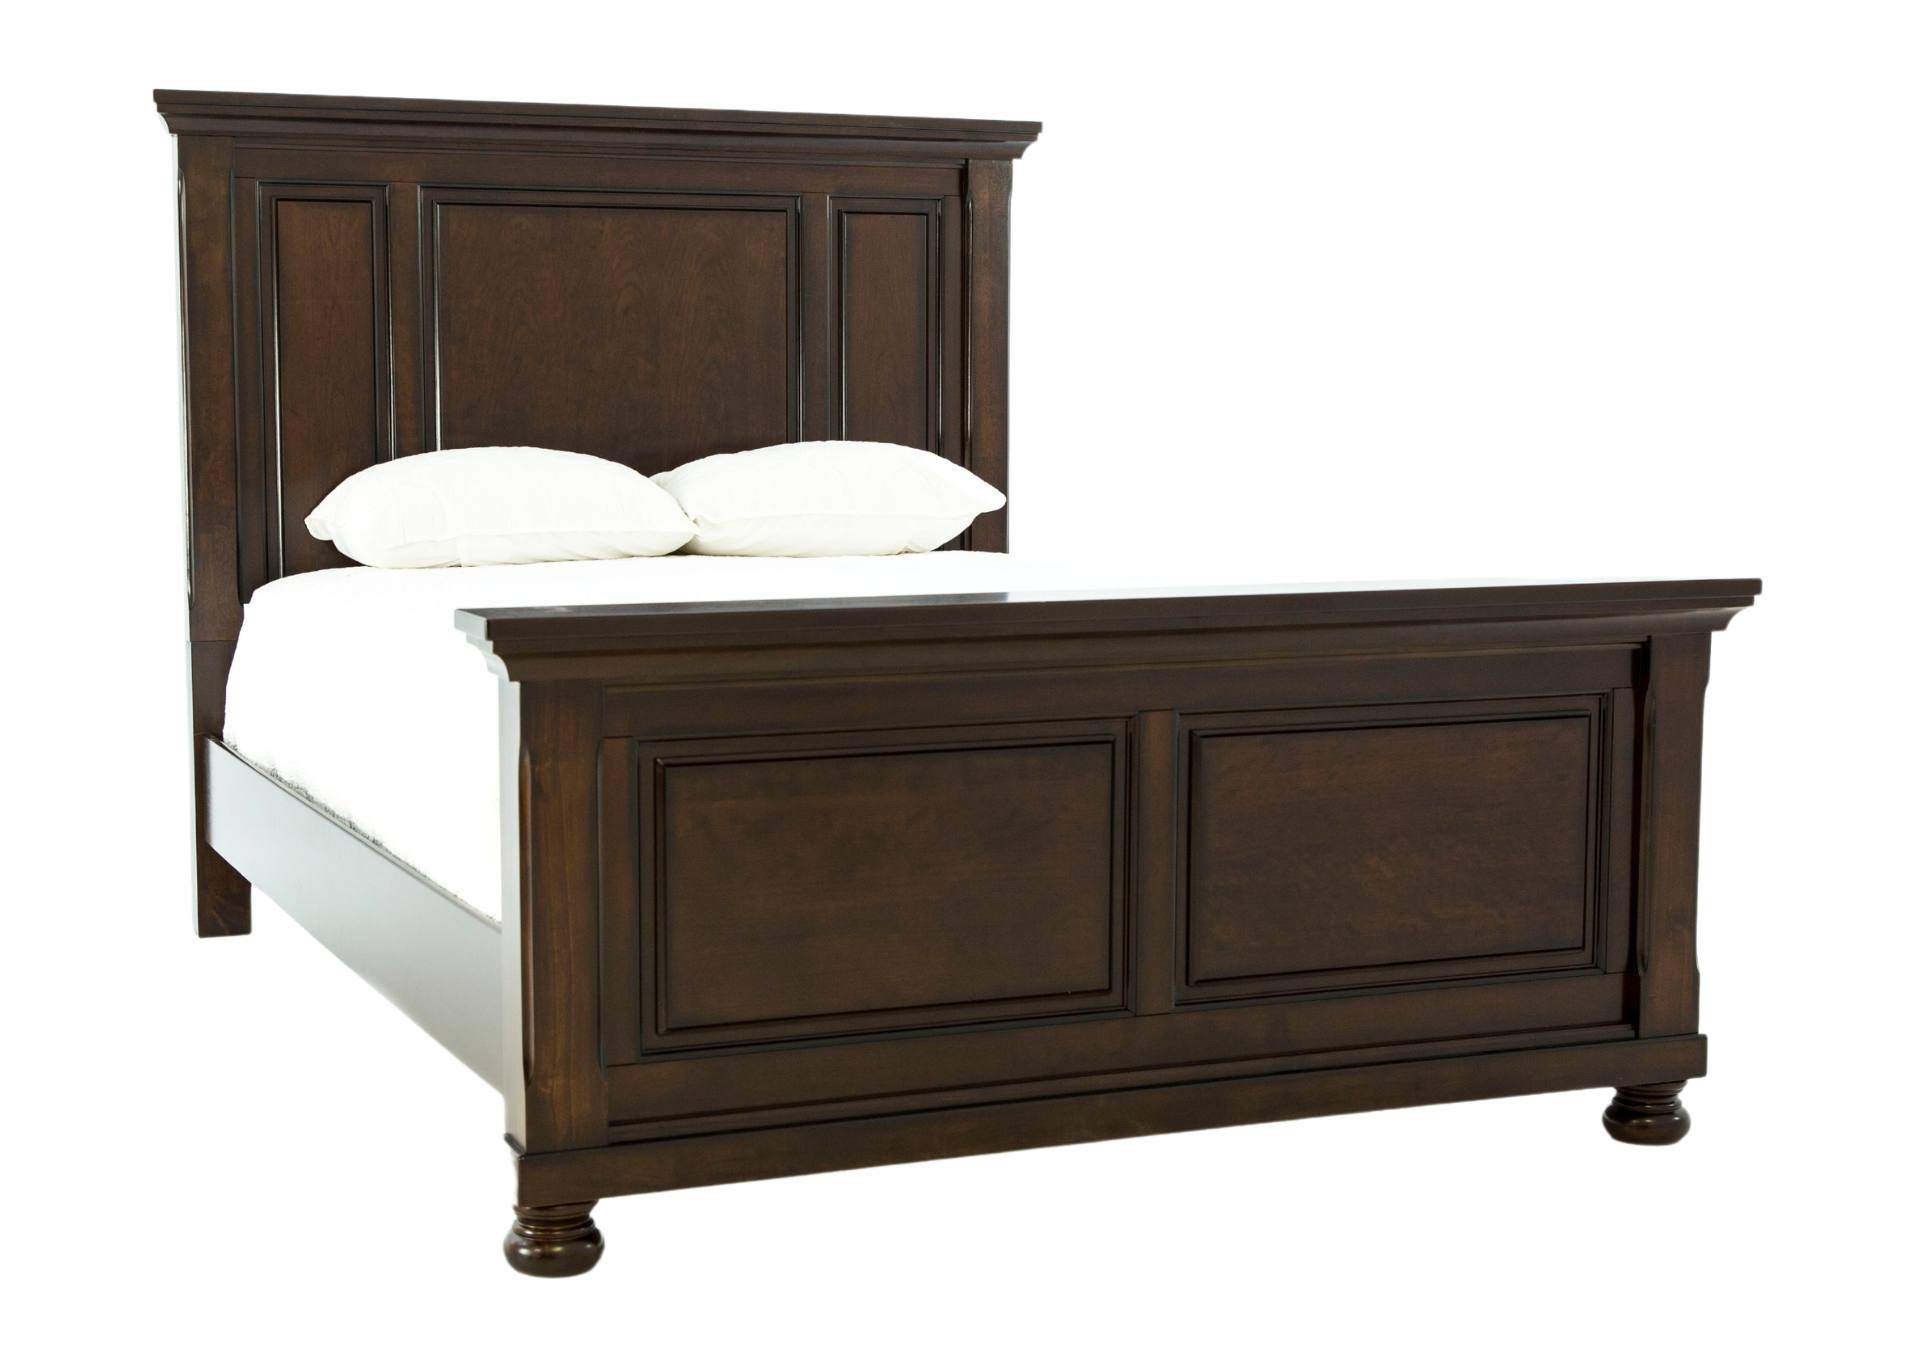 PORTER QUEEN PANEL BED,ASHLEY FURNITURE INC.